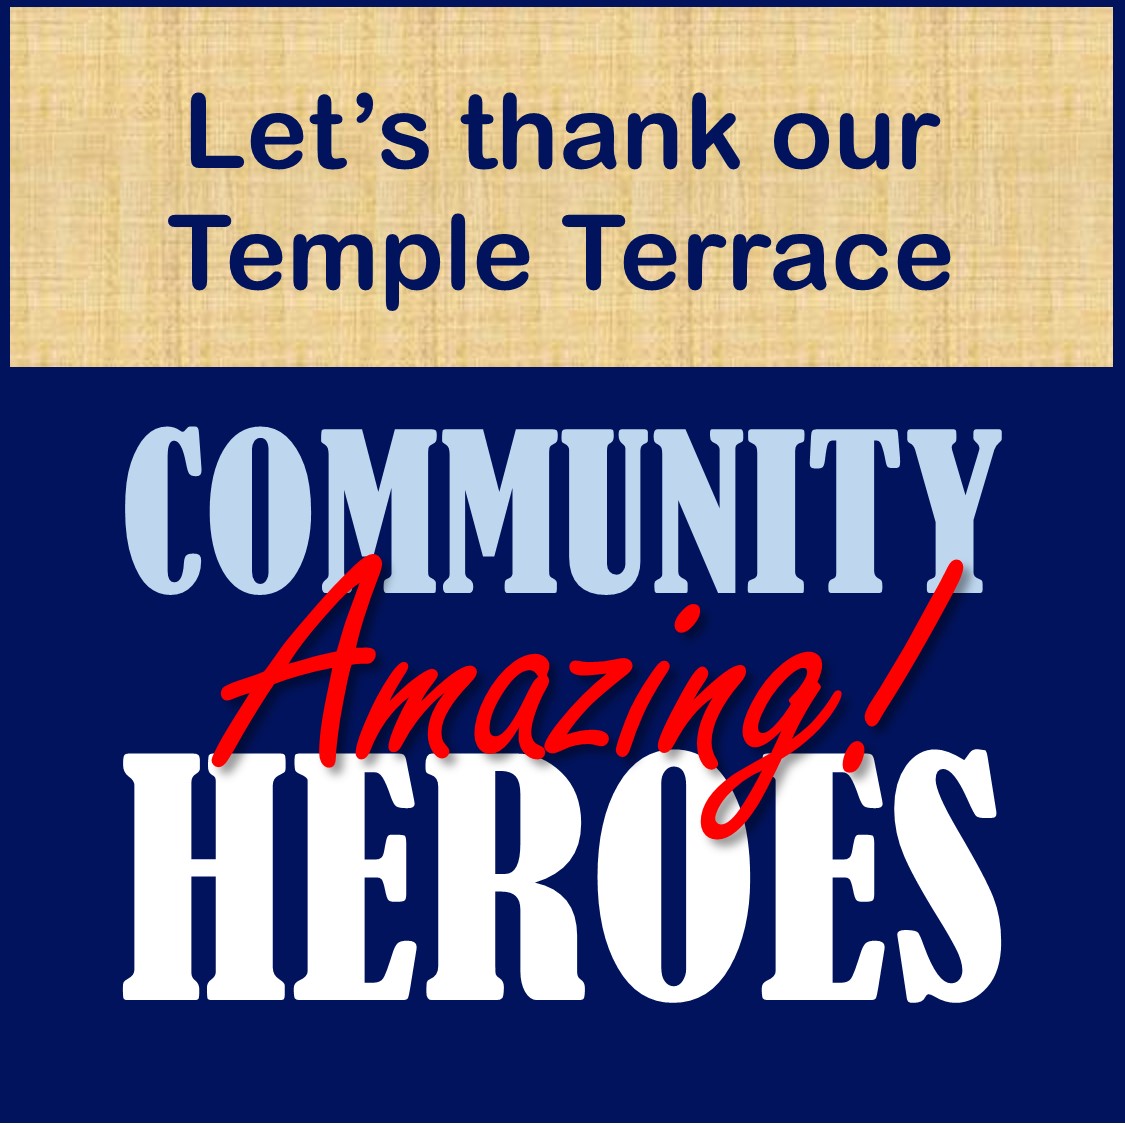 Let's thank our Temple Terrace Amazing Community Heroes